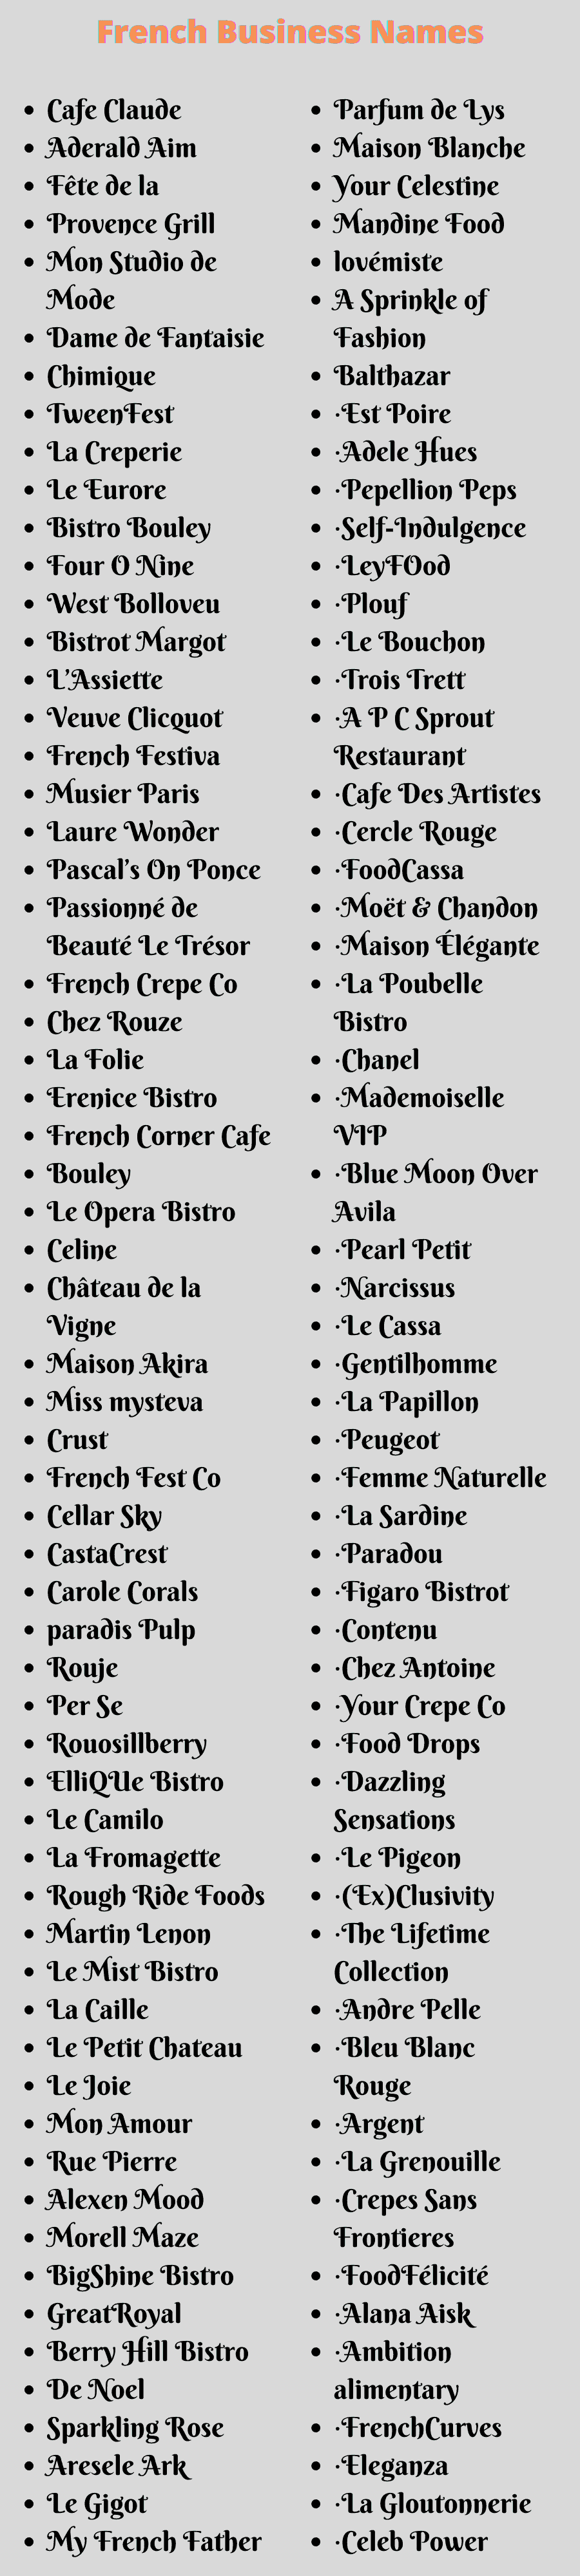 French Business Names: 400+ French Company And Boutique Names